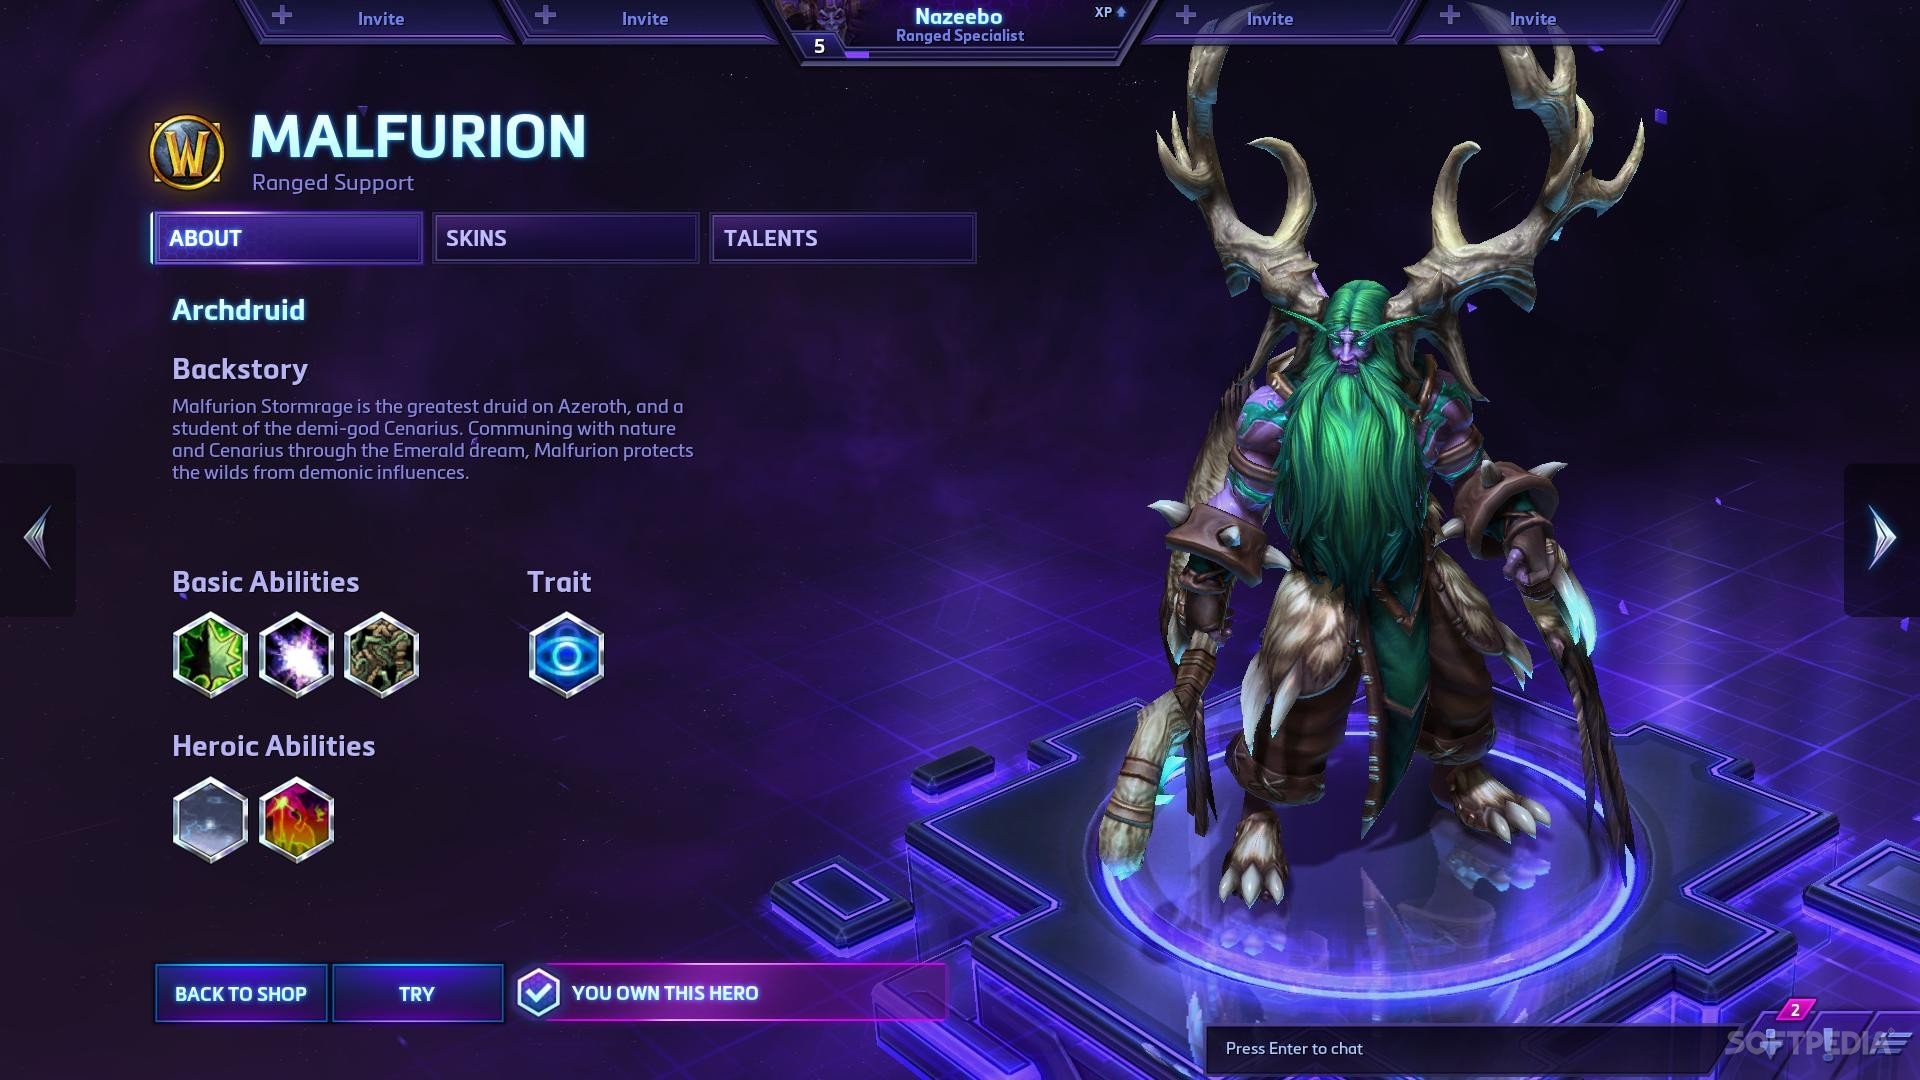 Play as Malfurion in HotS.